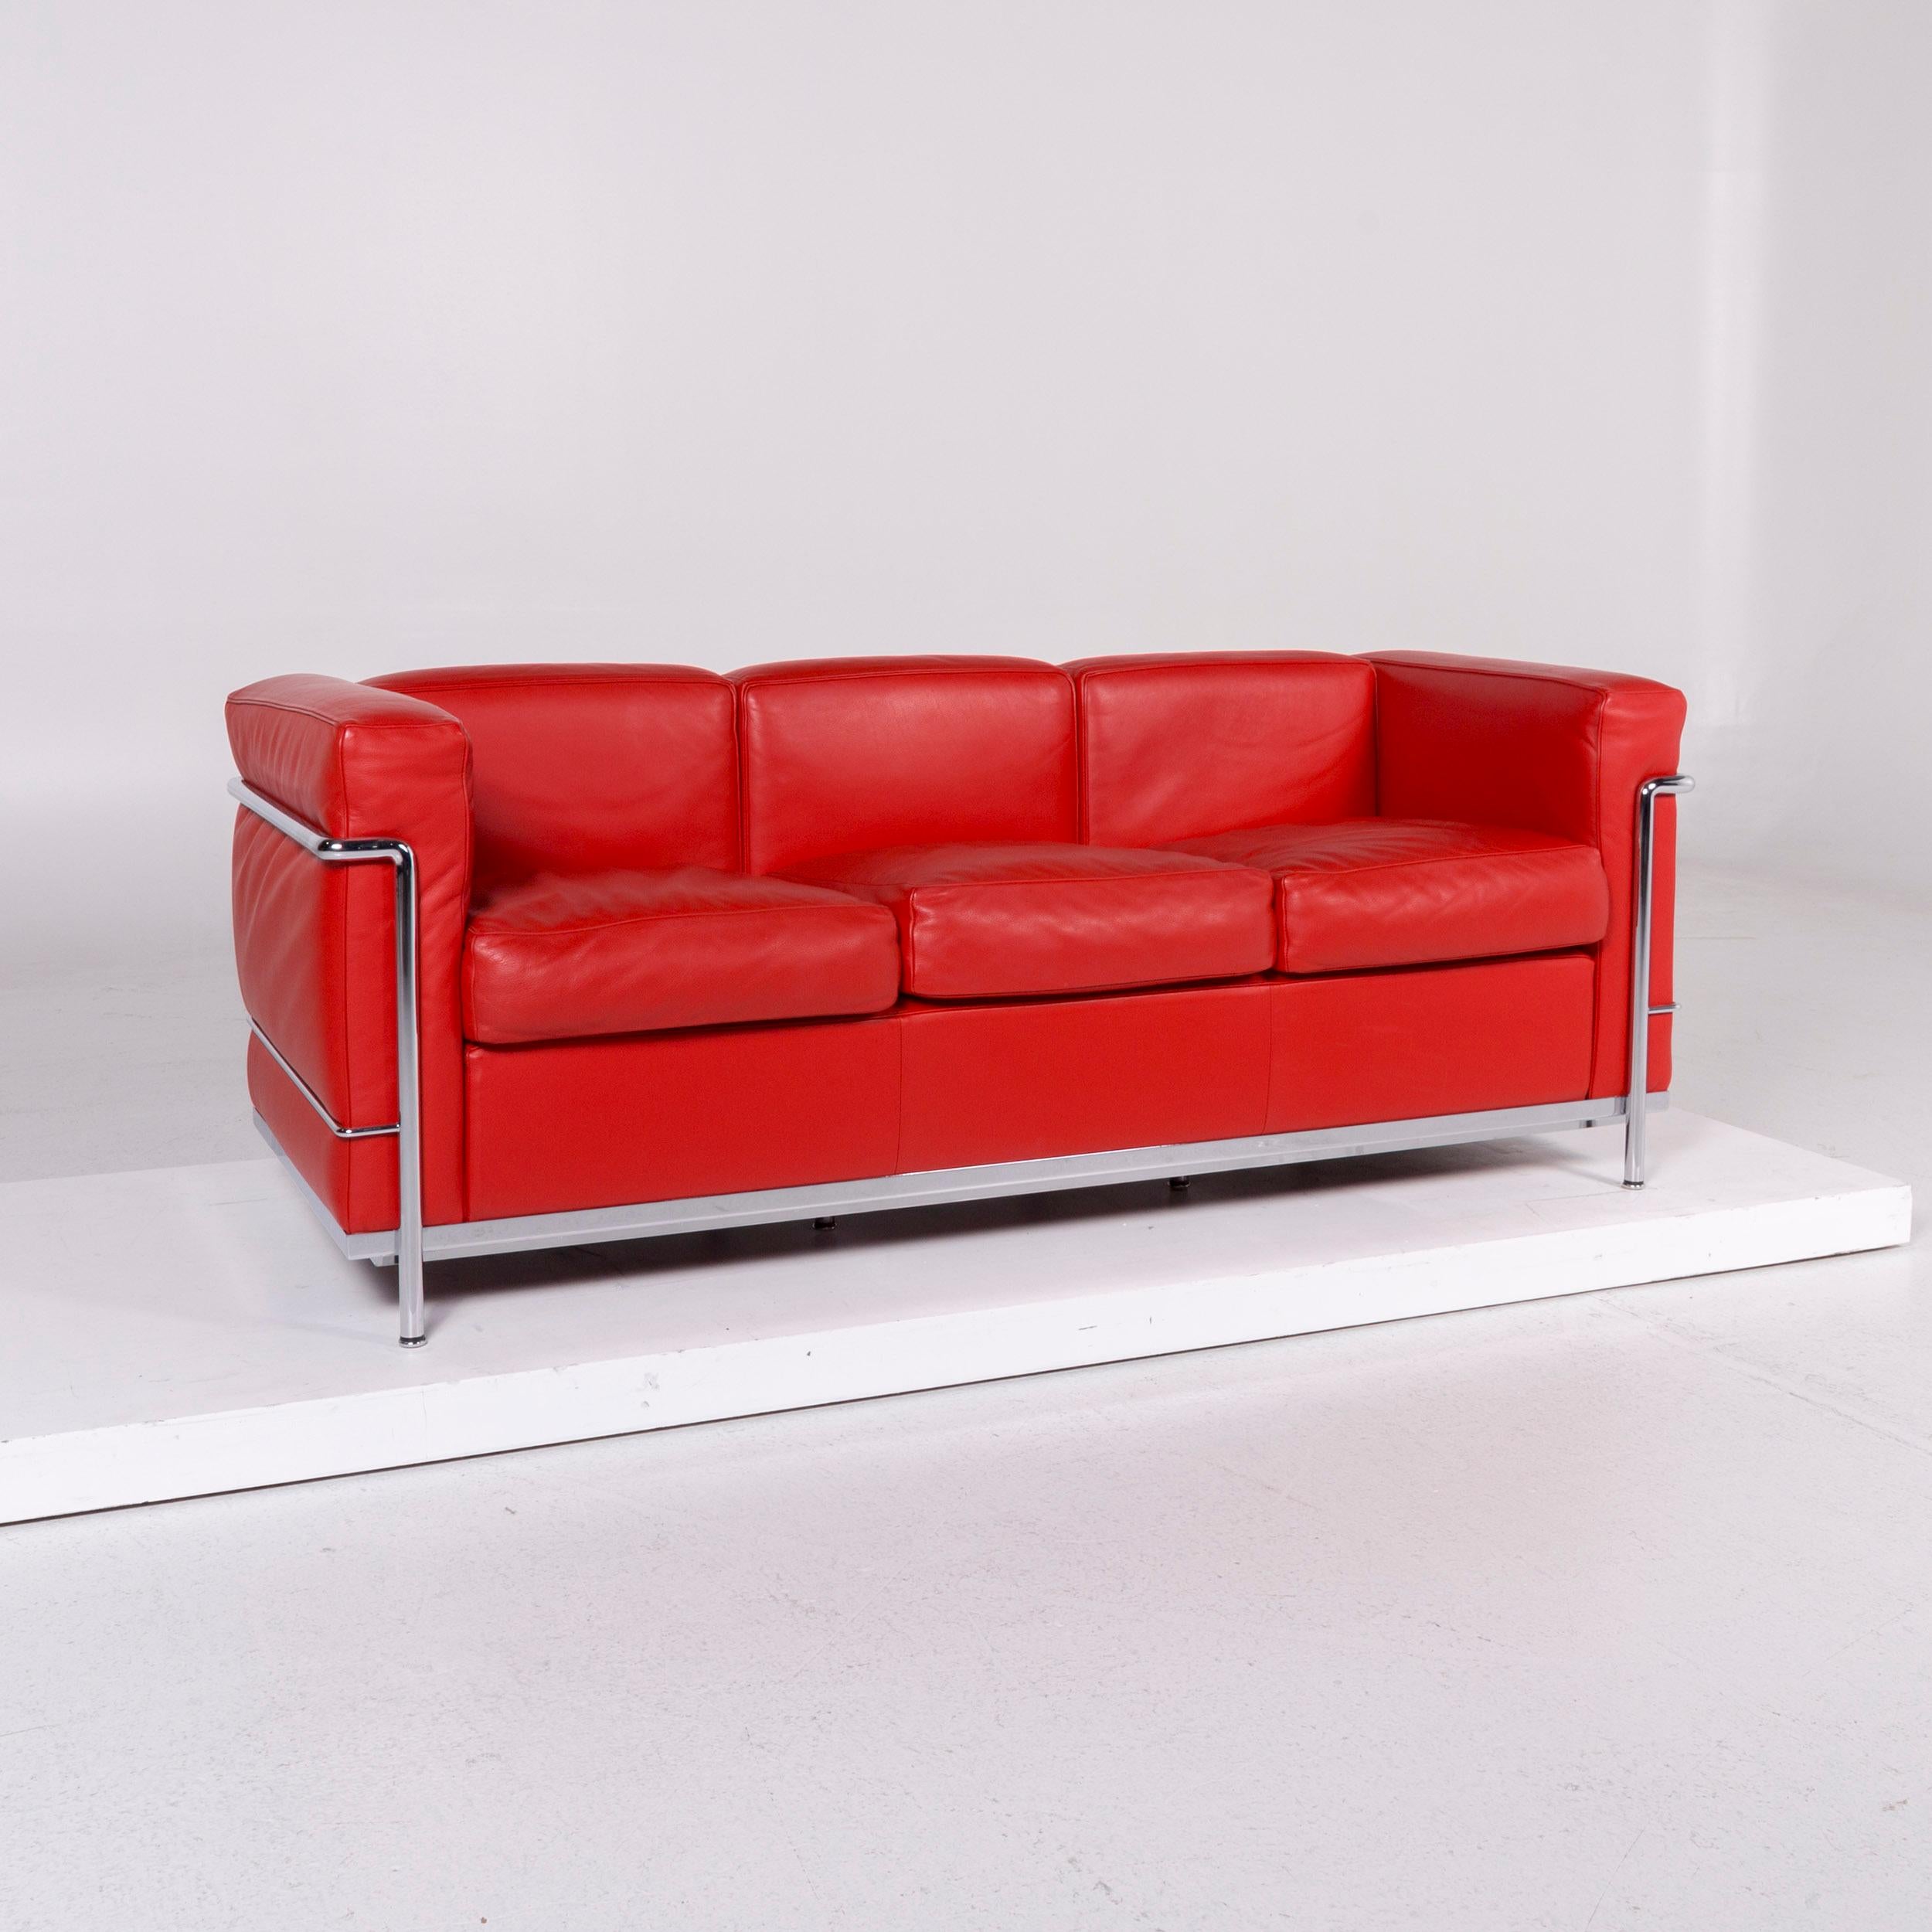 We bring to you a Cassina Le Corbusier LC 2 leather sofa red three-seat couch.

 
 Product measurements in centimeters:
 
 Depth 90
Width 180
Height 68
Seat-height 47
Rest-height 68
Seat-depth 54
Seat-width 148
Back-height 20.